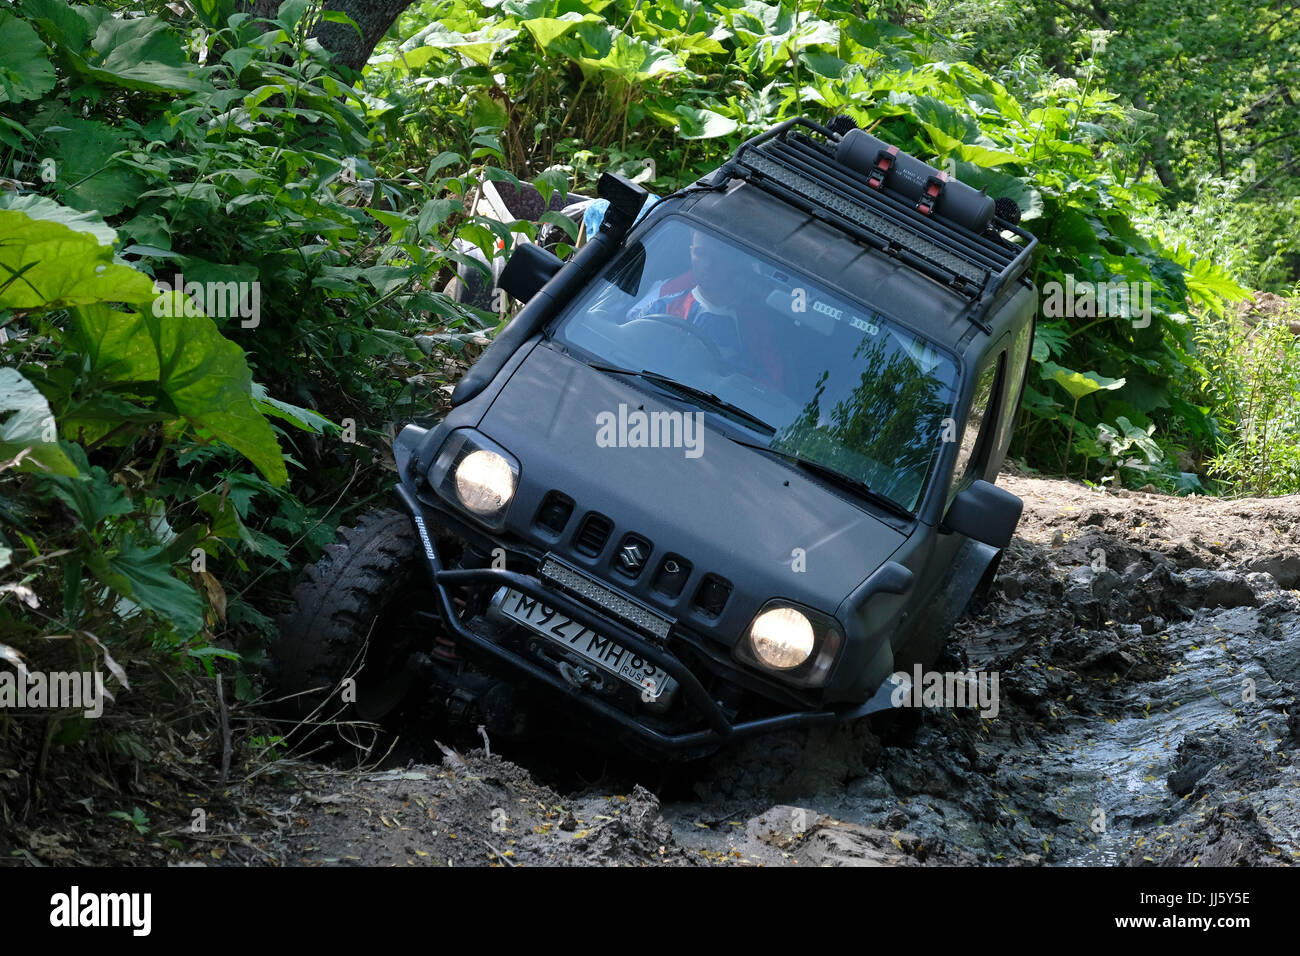 A Suzuki Jimny SUV vehicle crossing a muddy mountainous area in the Korsakovsky District  south eastern side of the island of Sakhalin in the North Pacific Ocean, Russia Stock Photo